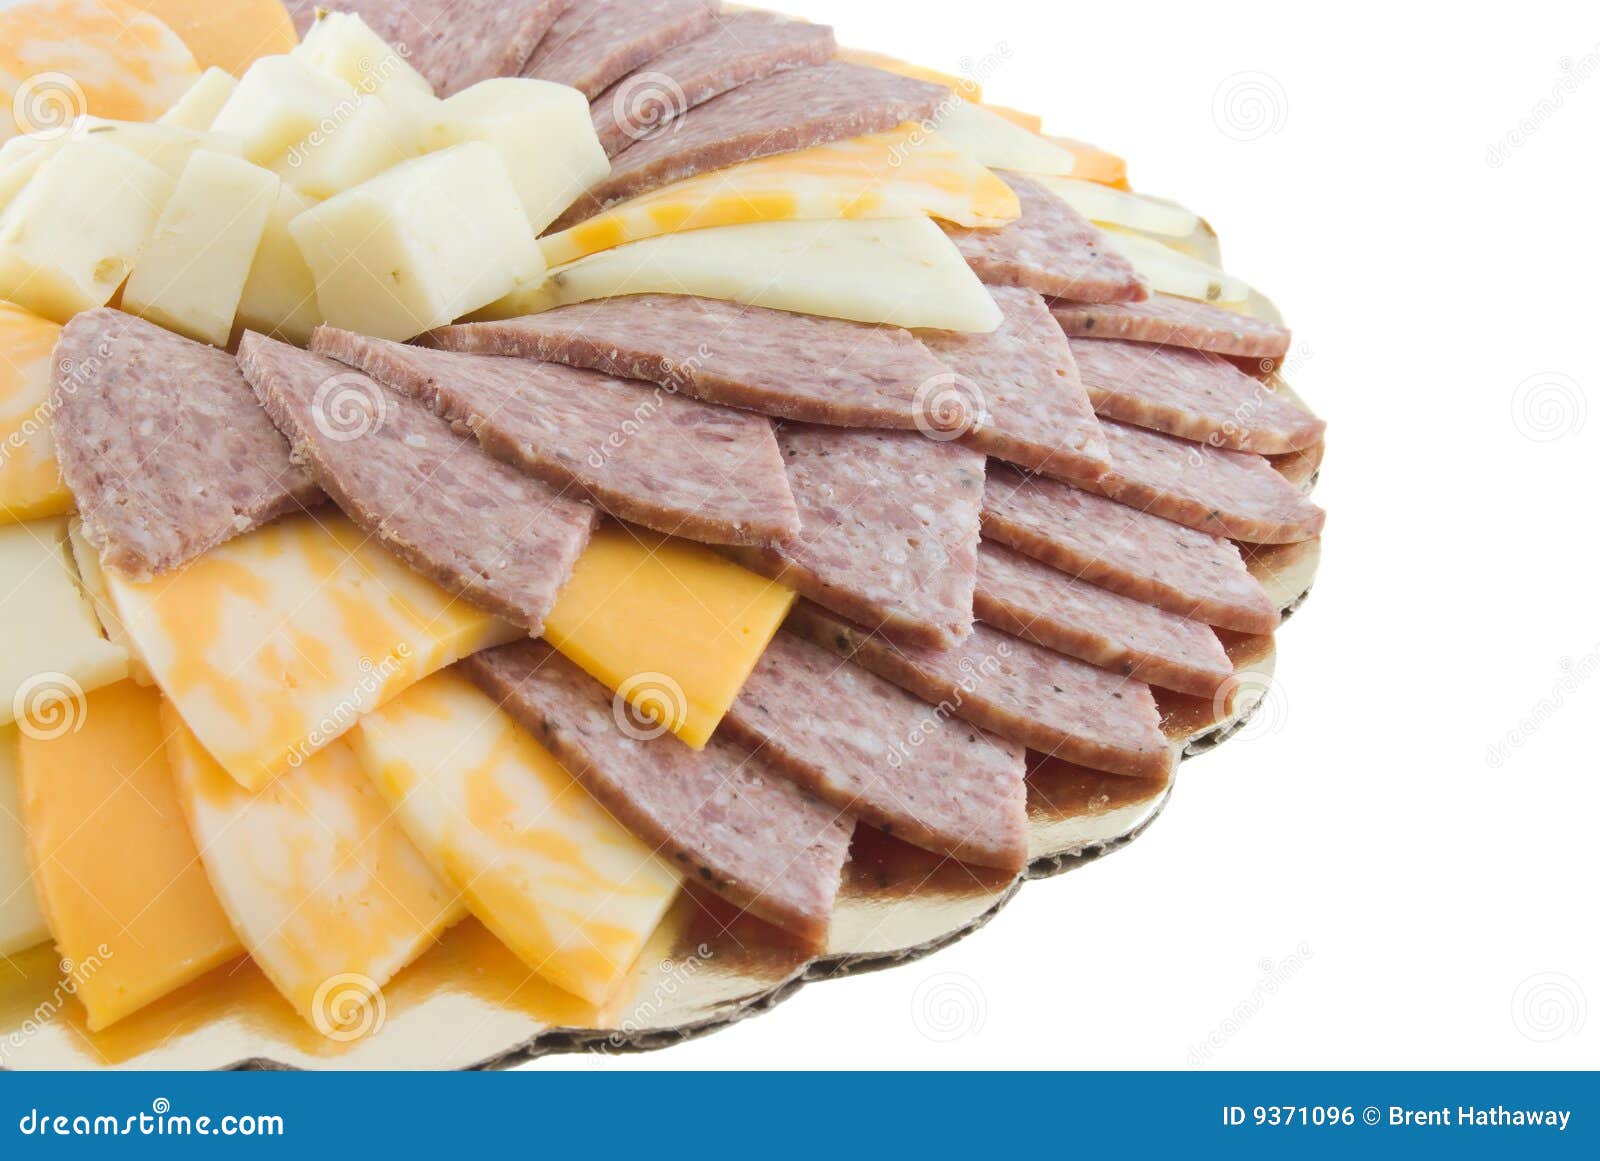 cheese and meat tray